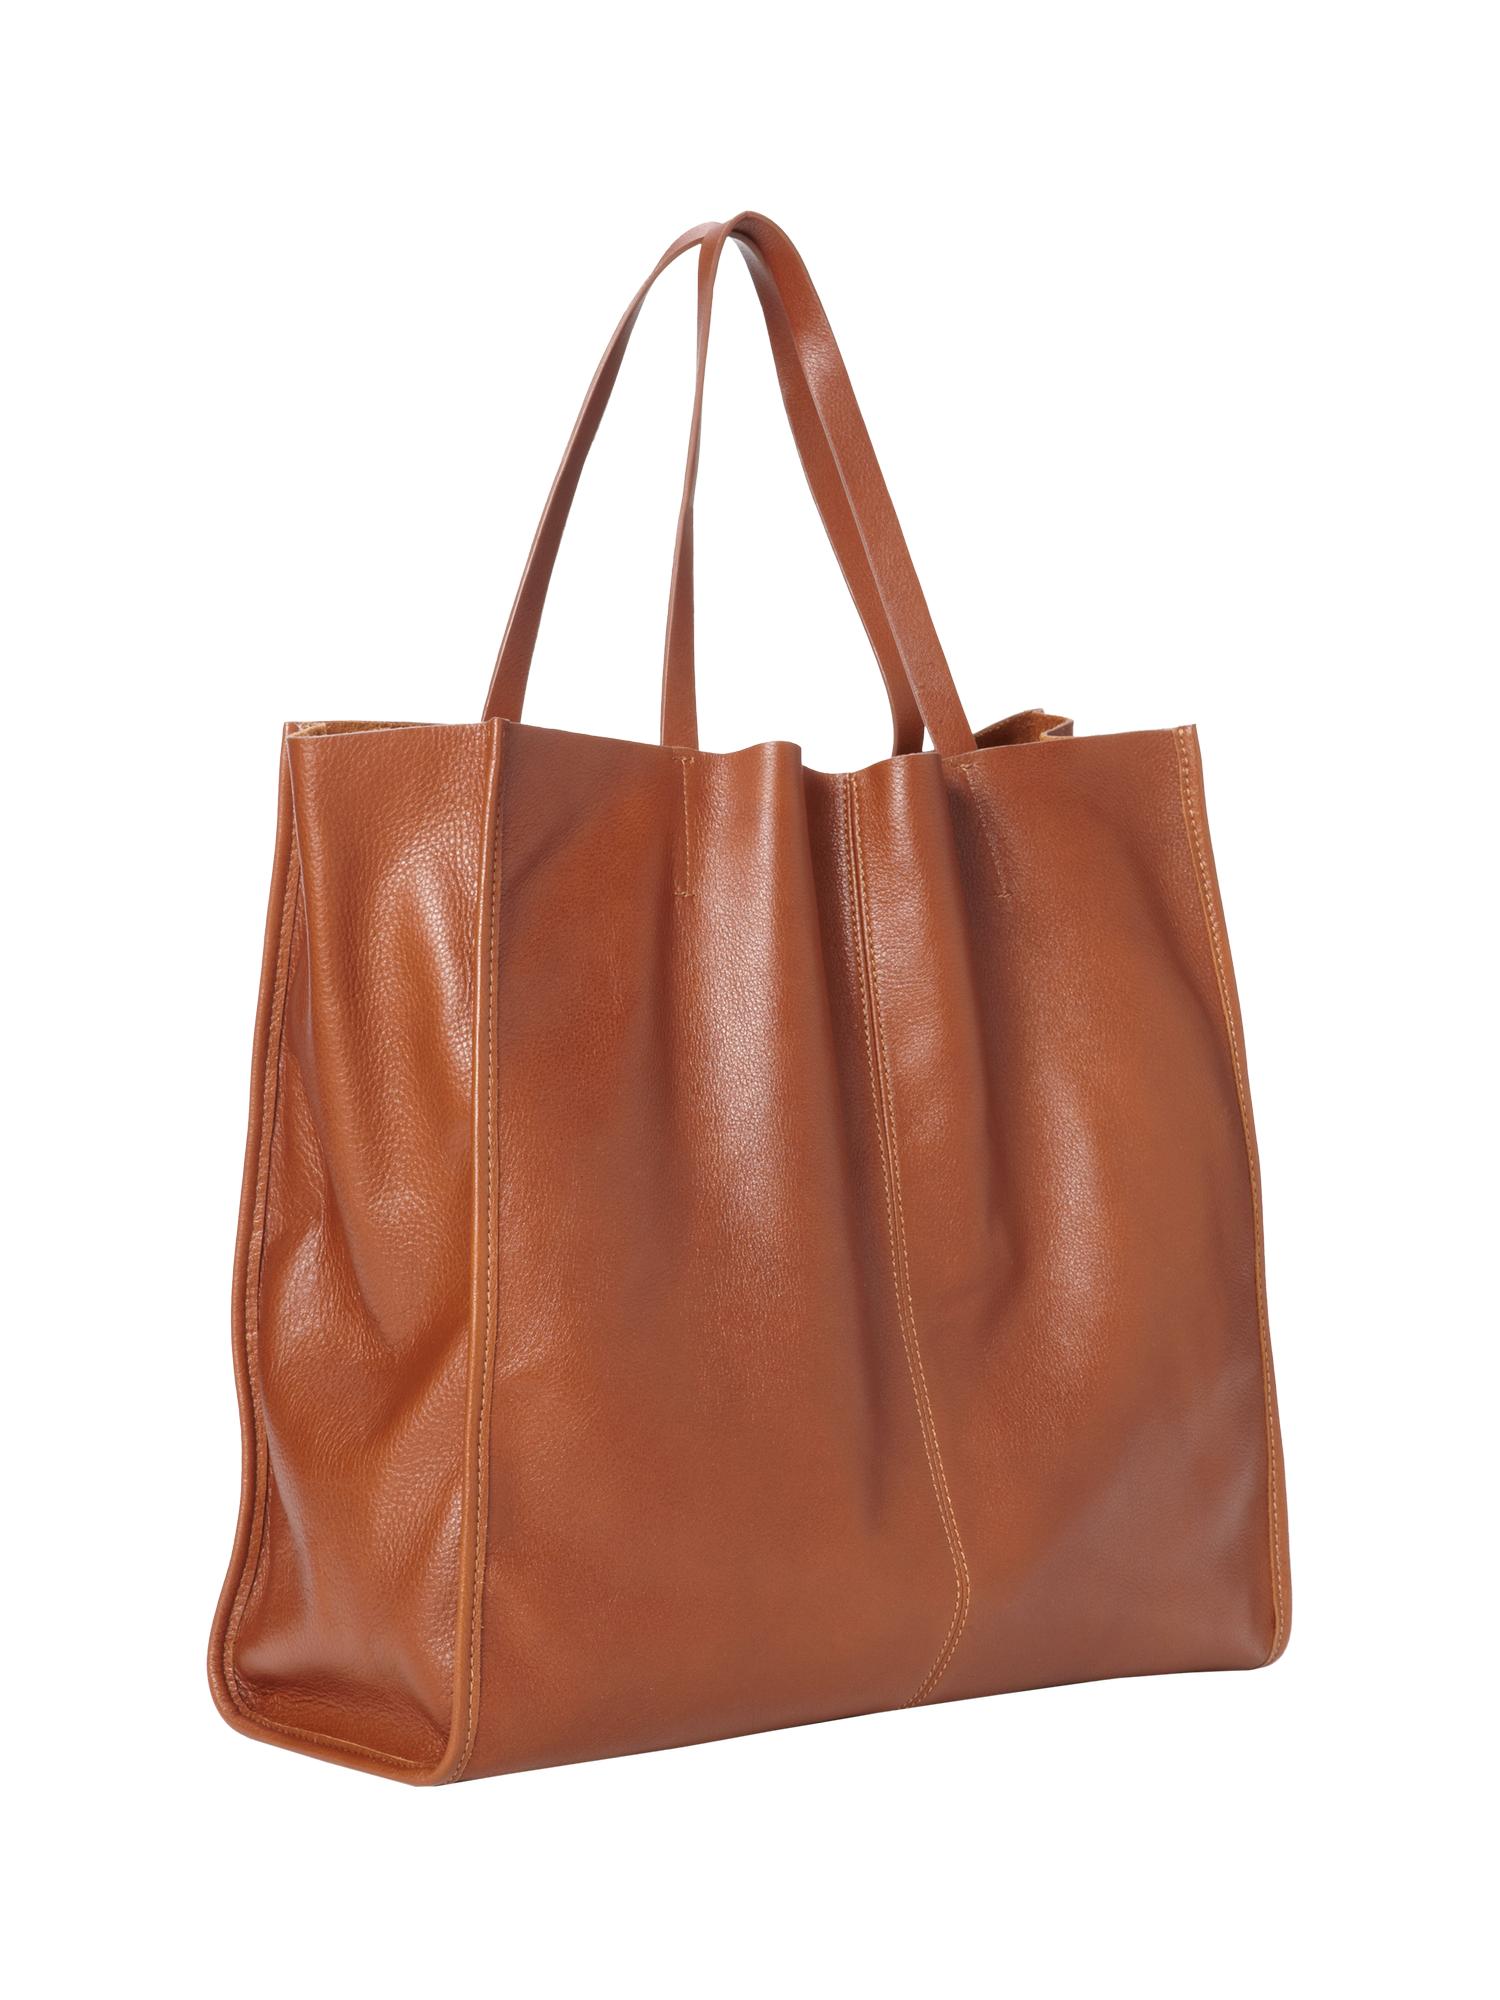 Gap Leather Travel Tote in Brown (saddle) | Lyst